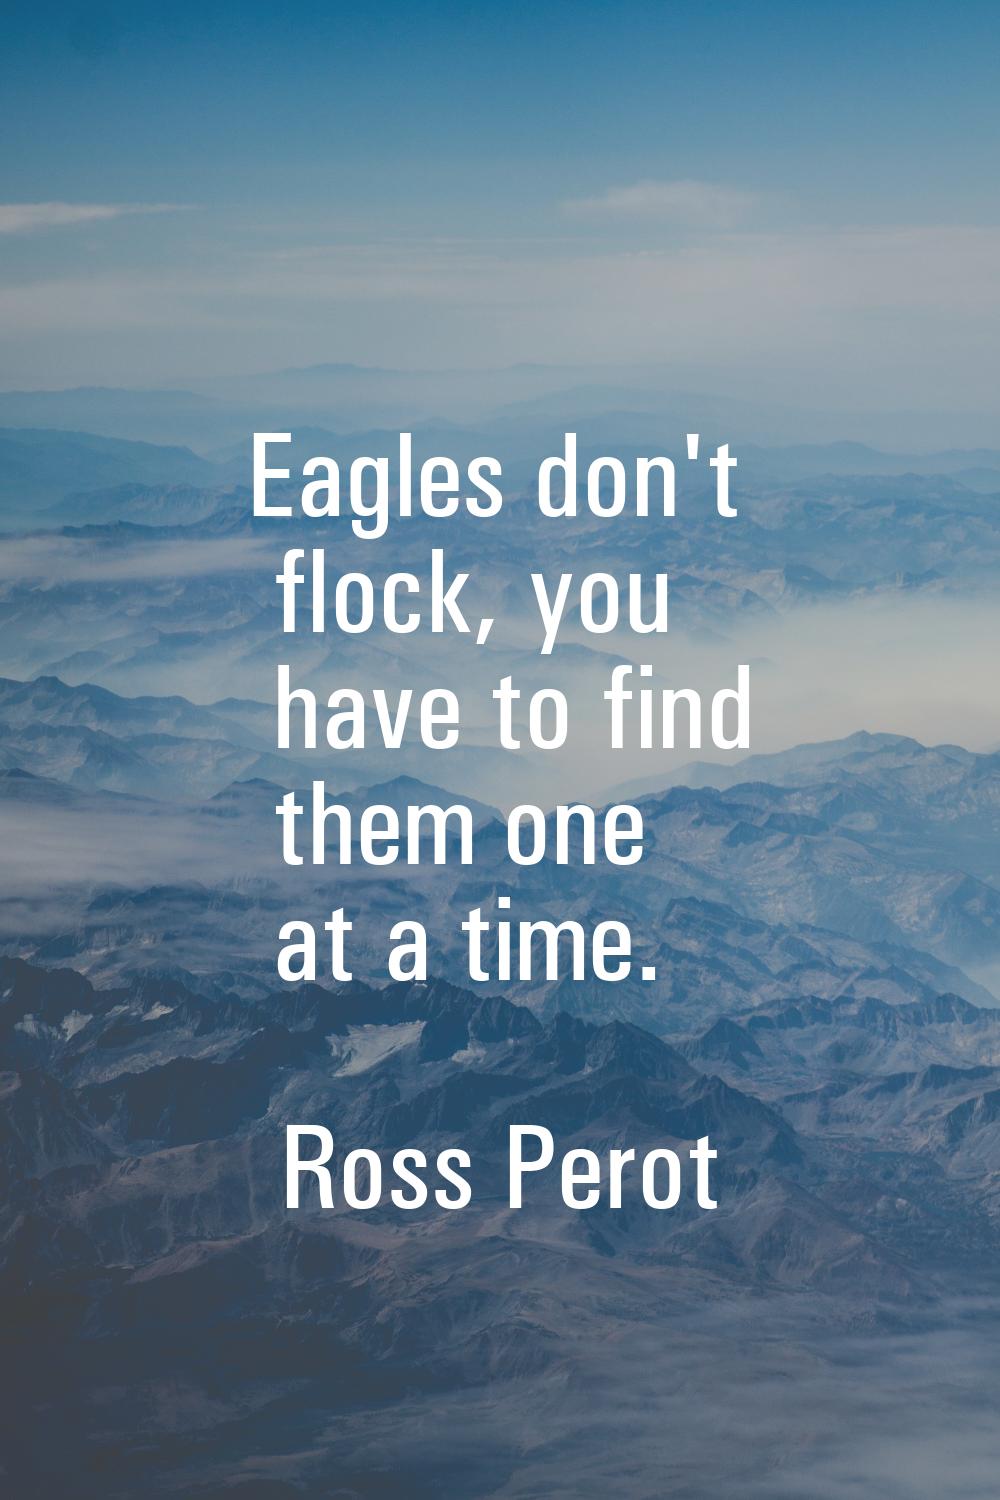 Eagles don't flock, you have to find them one at a time.